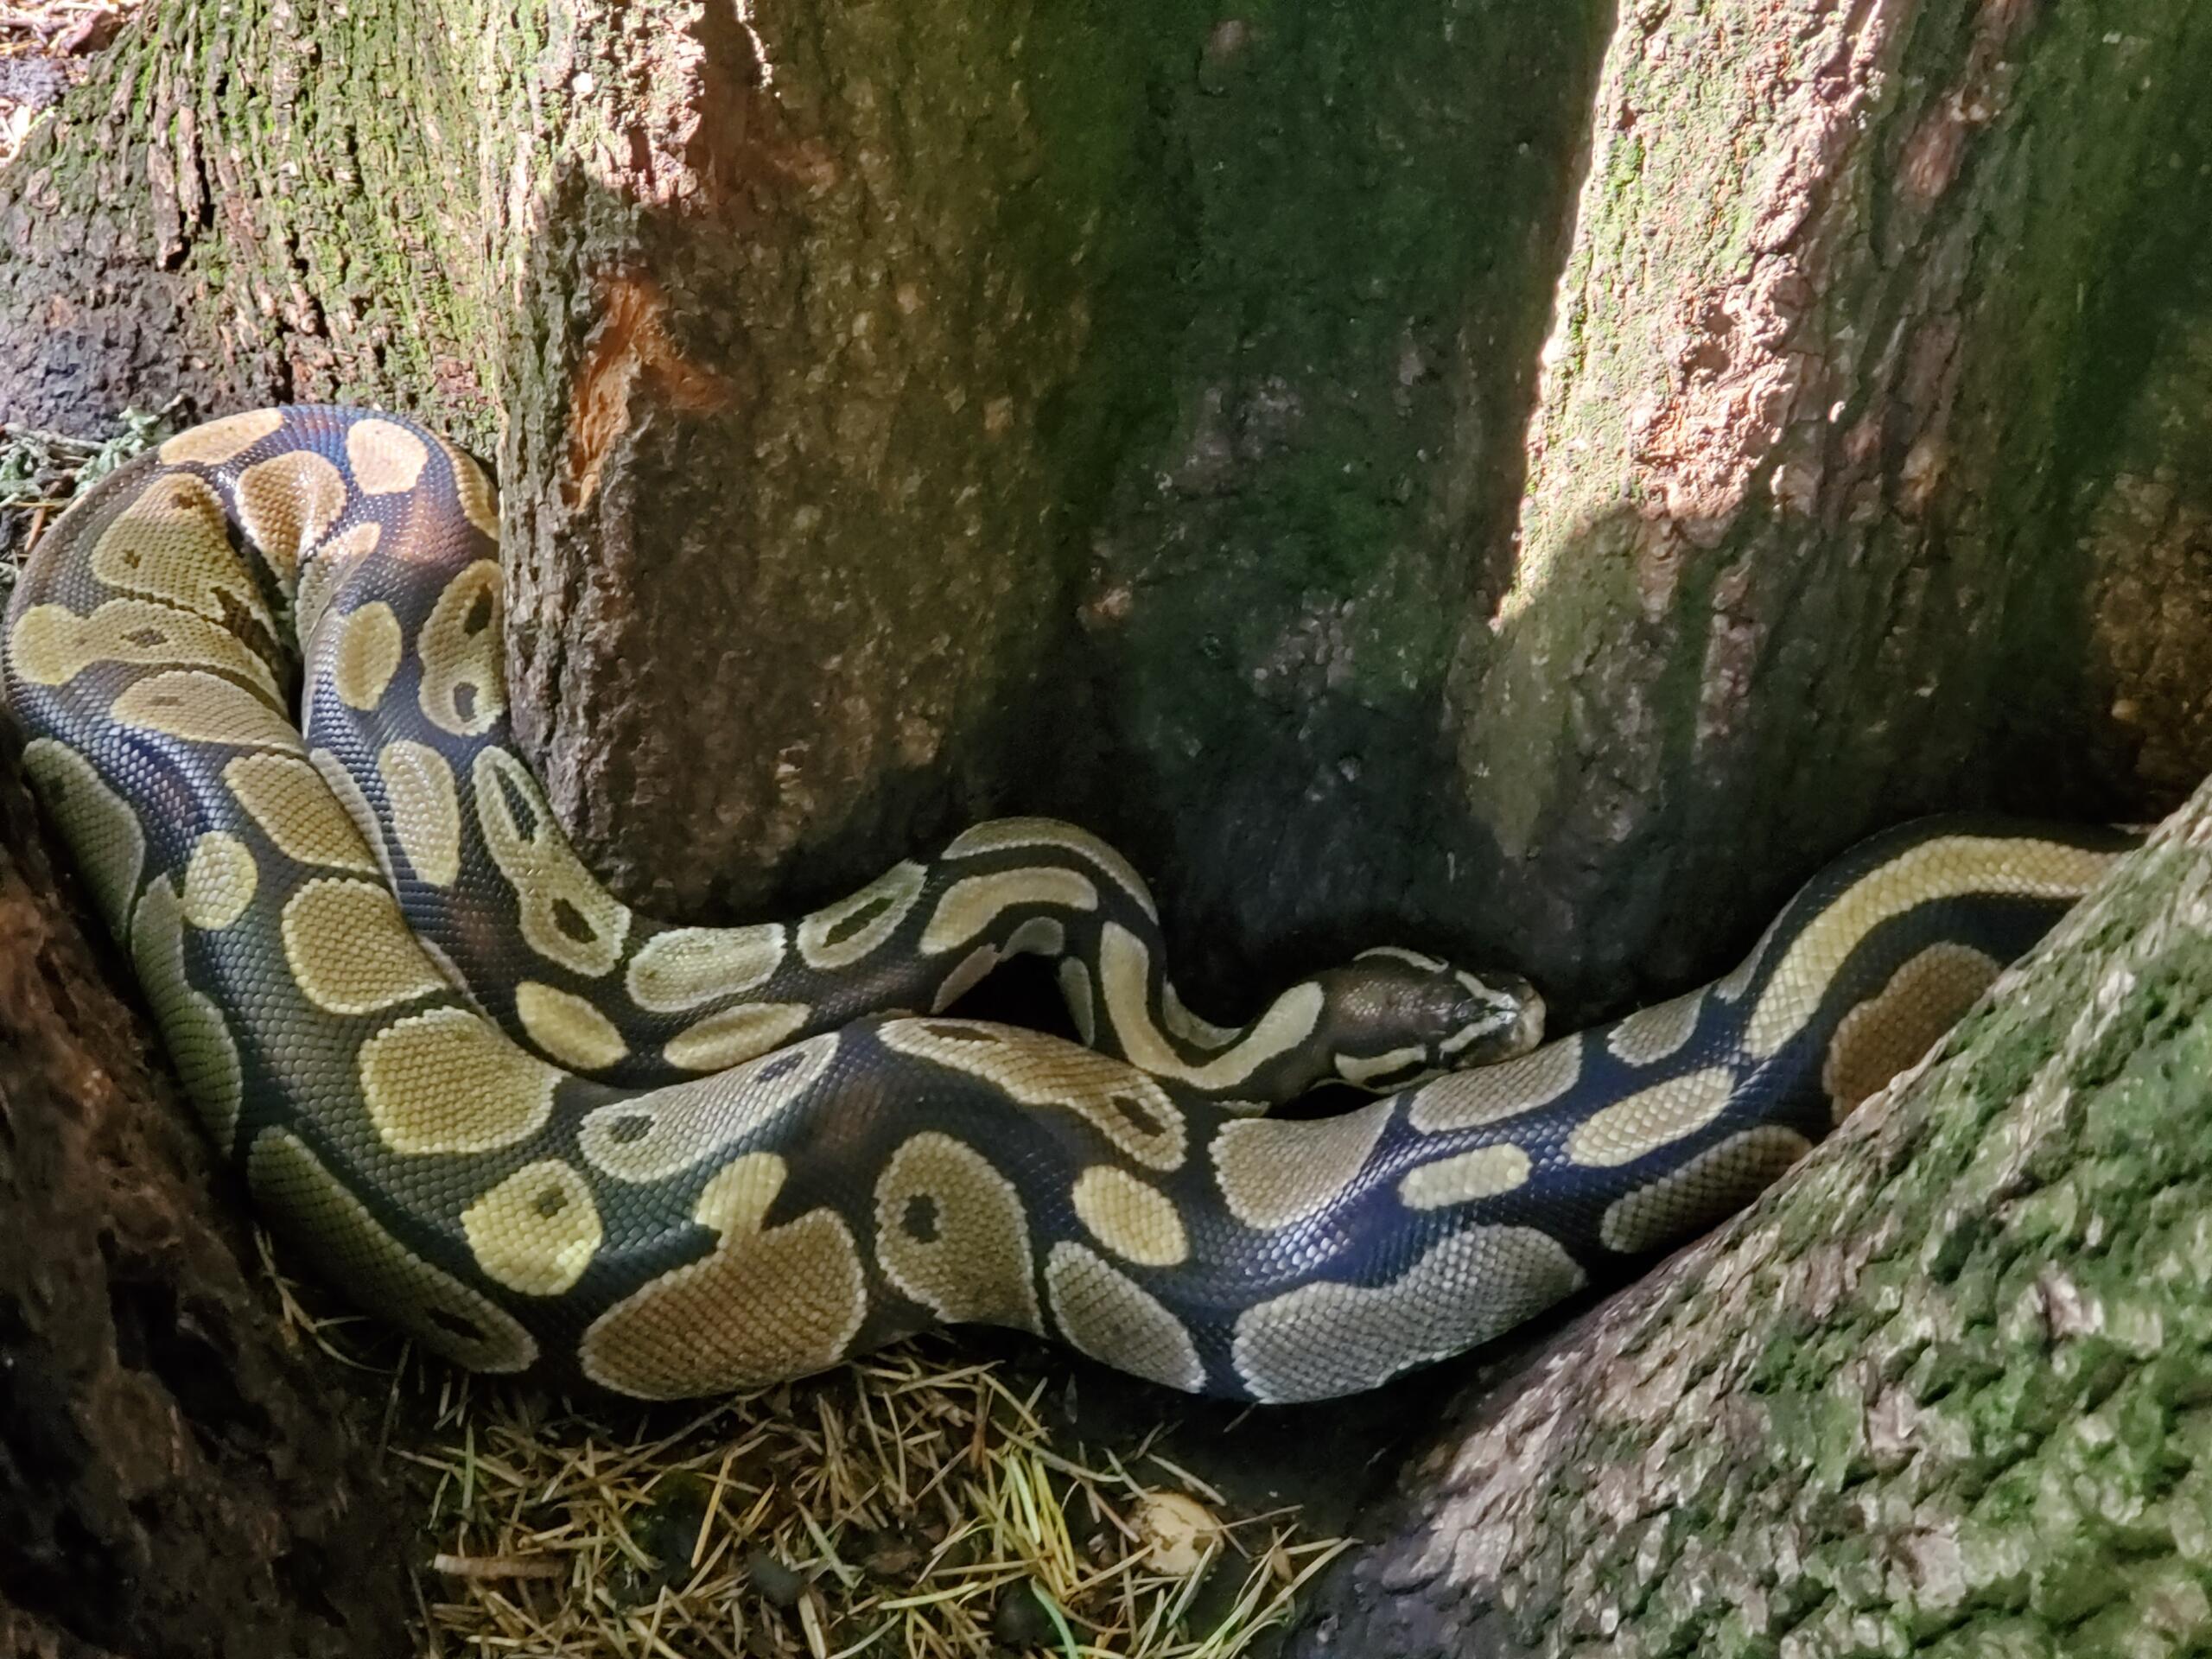 Camas Police and Animal Control responded to a call of large snakes in Lacamas Park.